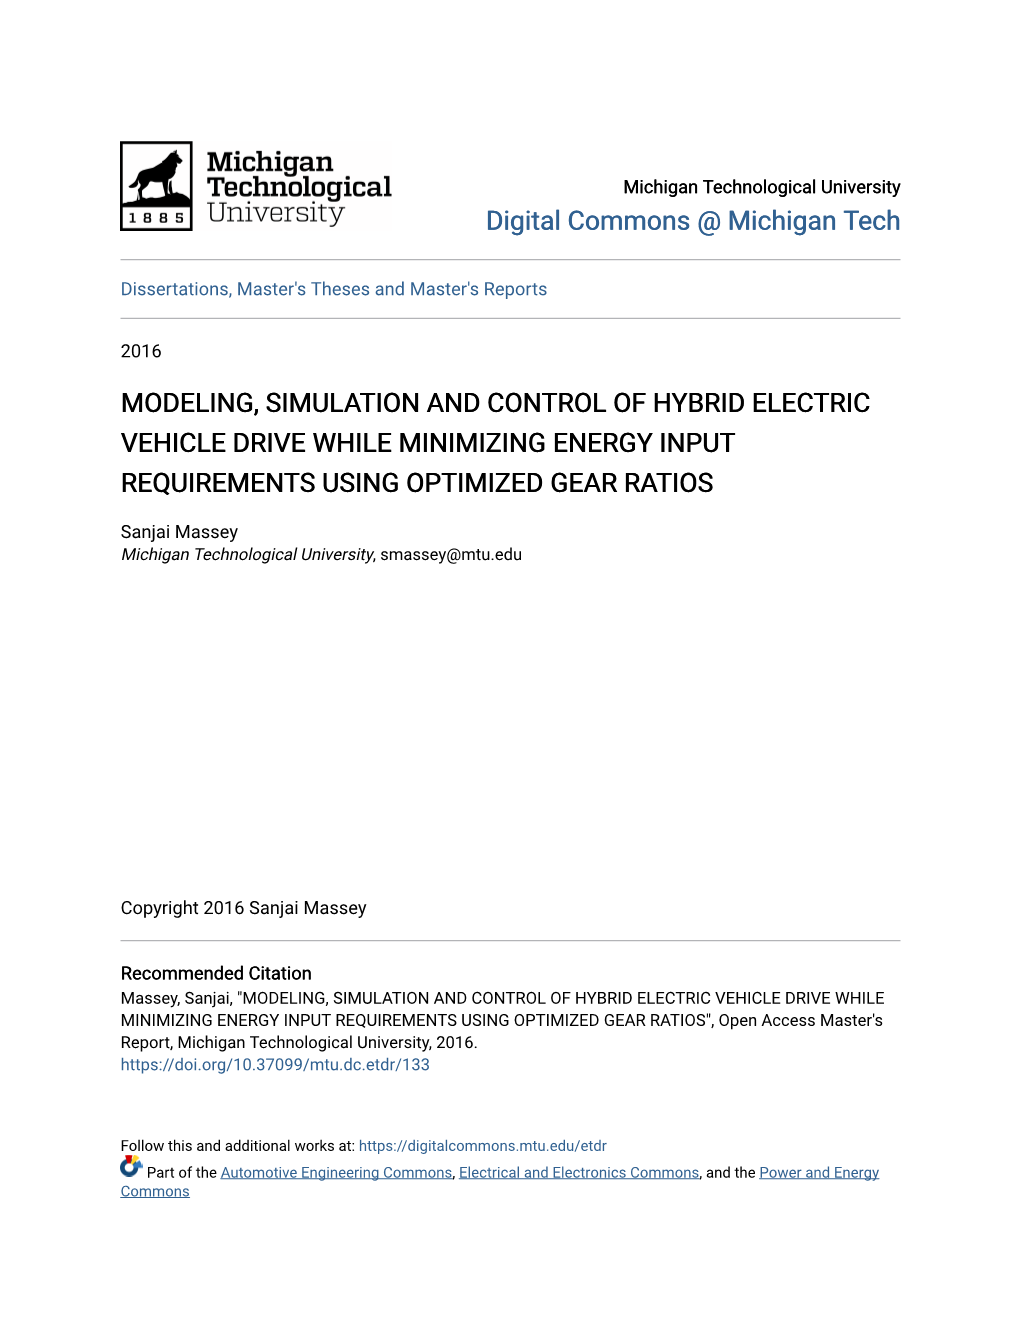 Modeling, Simulation and Control of Hybrid Electric Vehicle Drive While Minimizing Energy Input Requirements Using Optimized Gear Ratios